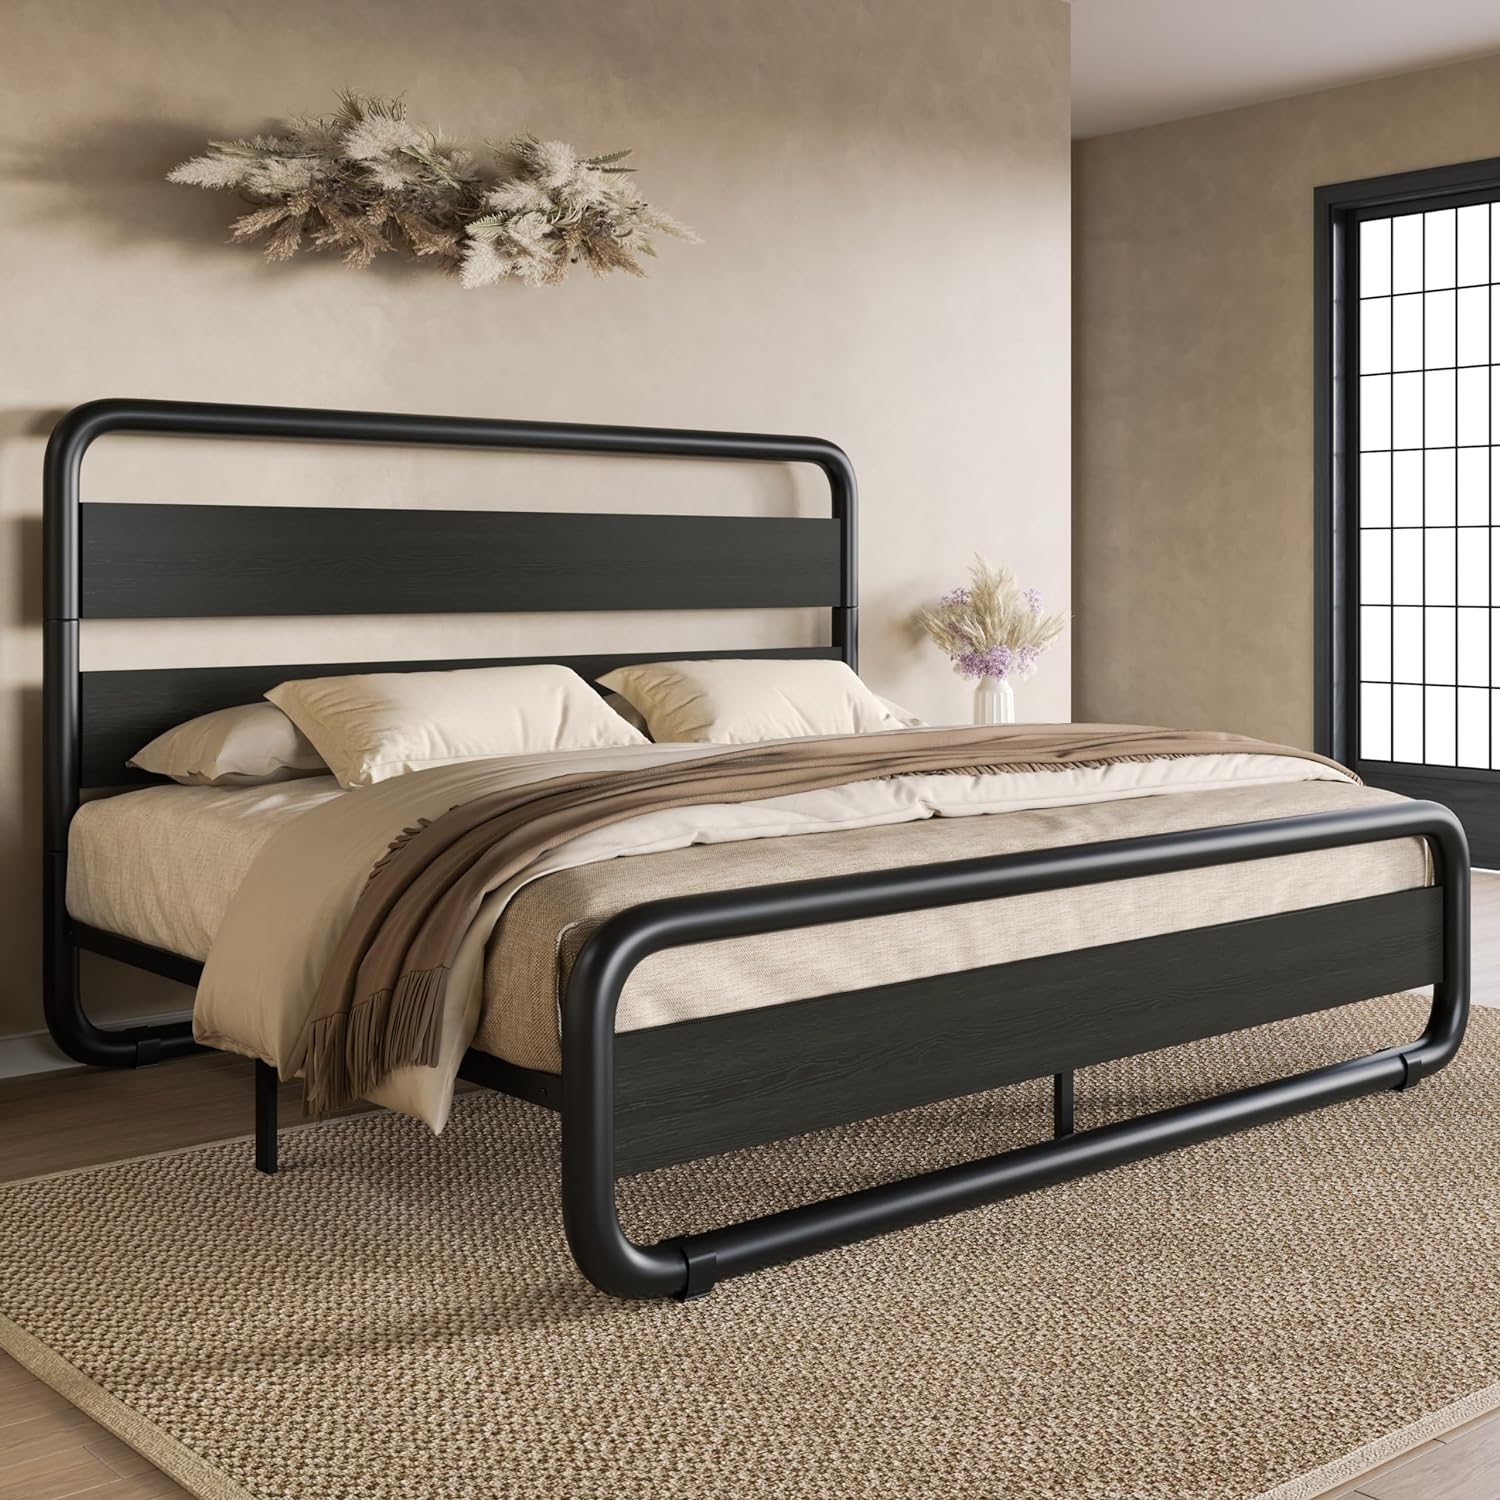 Modern metal bed frame with a minimalist design, featuring a headboard and footboard, set in a neutrally toned bedroom